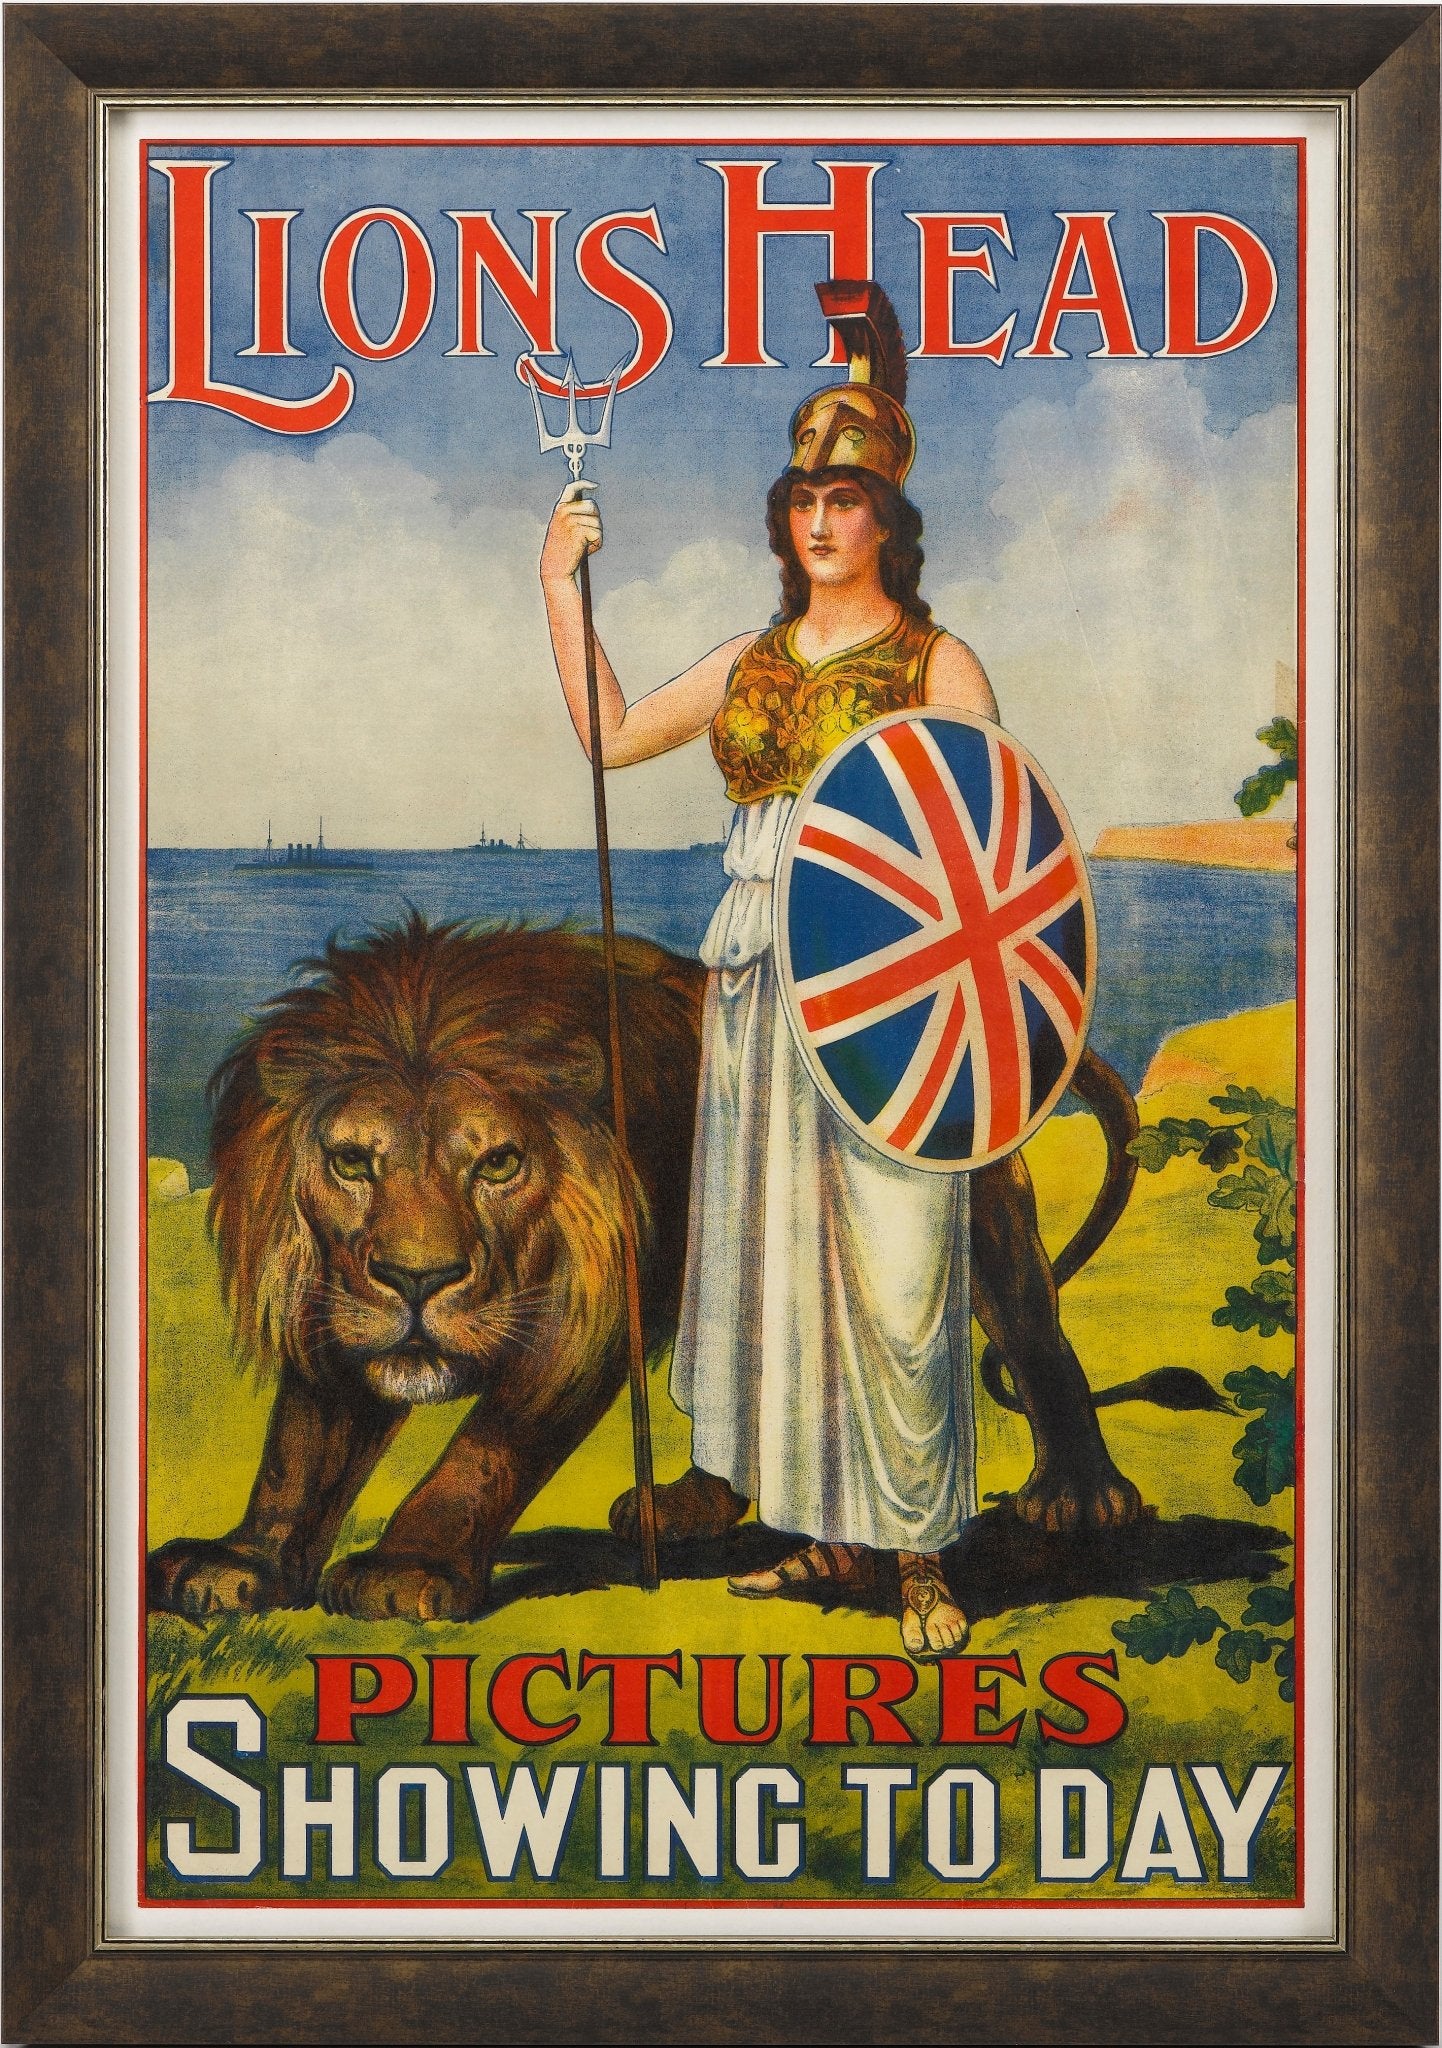 "Lions Head / Pictures Showing Today" Cinematic Poster, Circa 1911 - The Great Republic